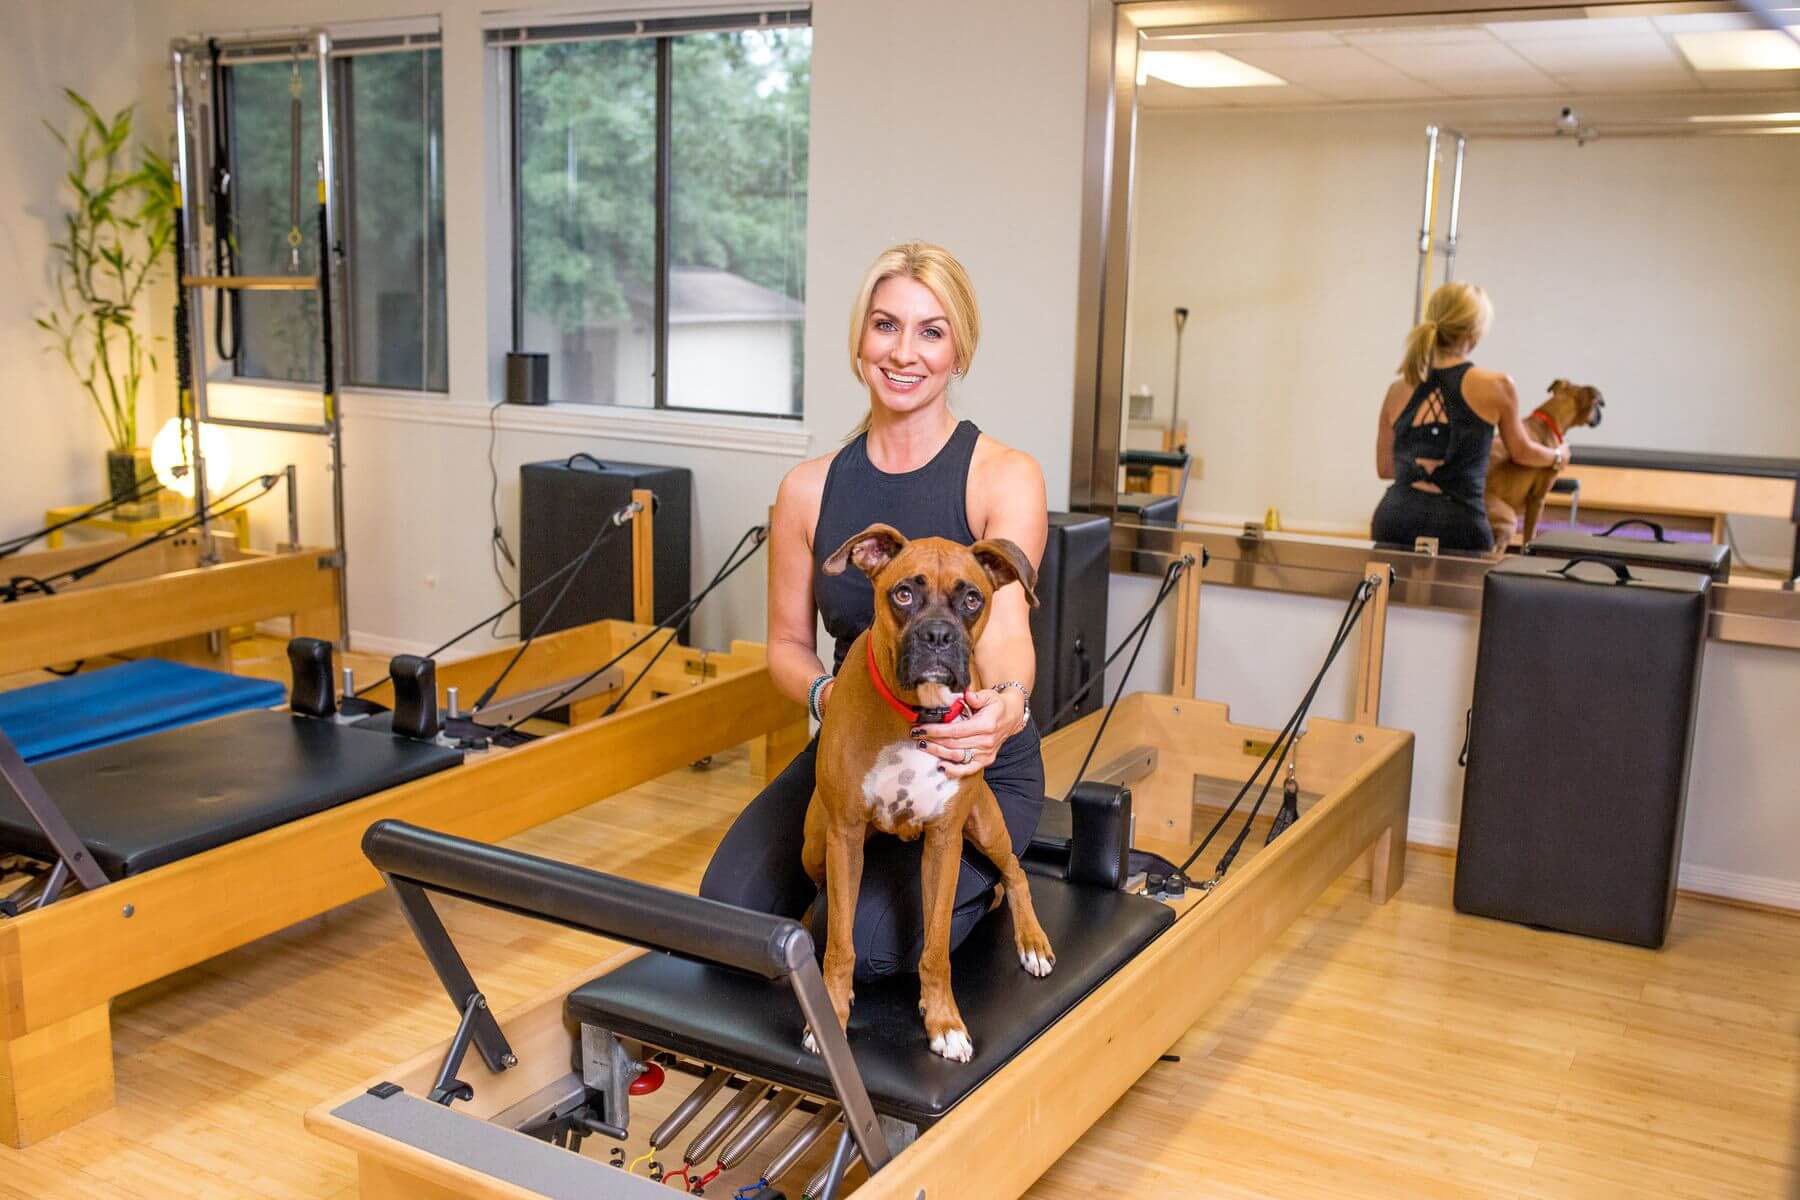 Cheryl and her dog on the Pilates Reformer